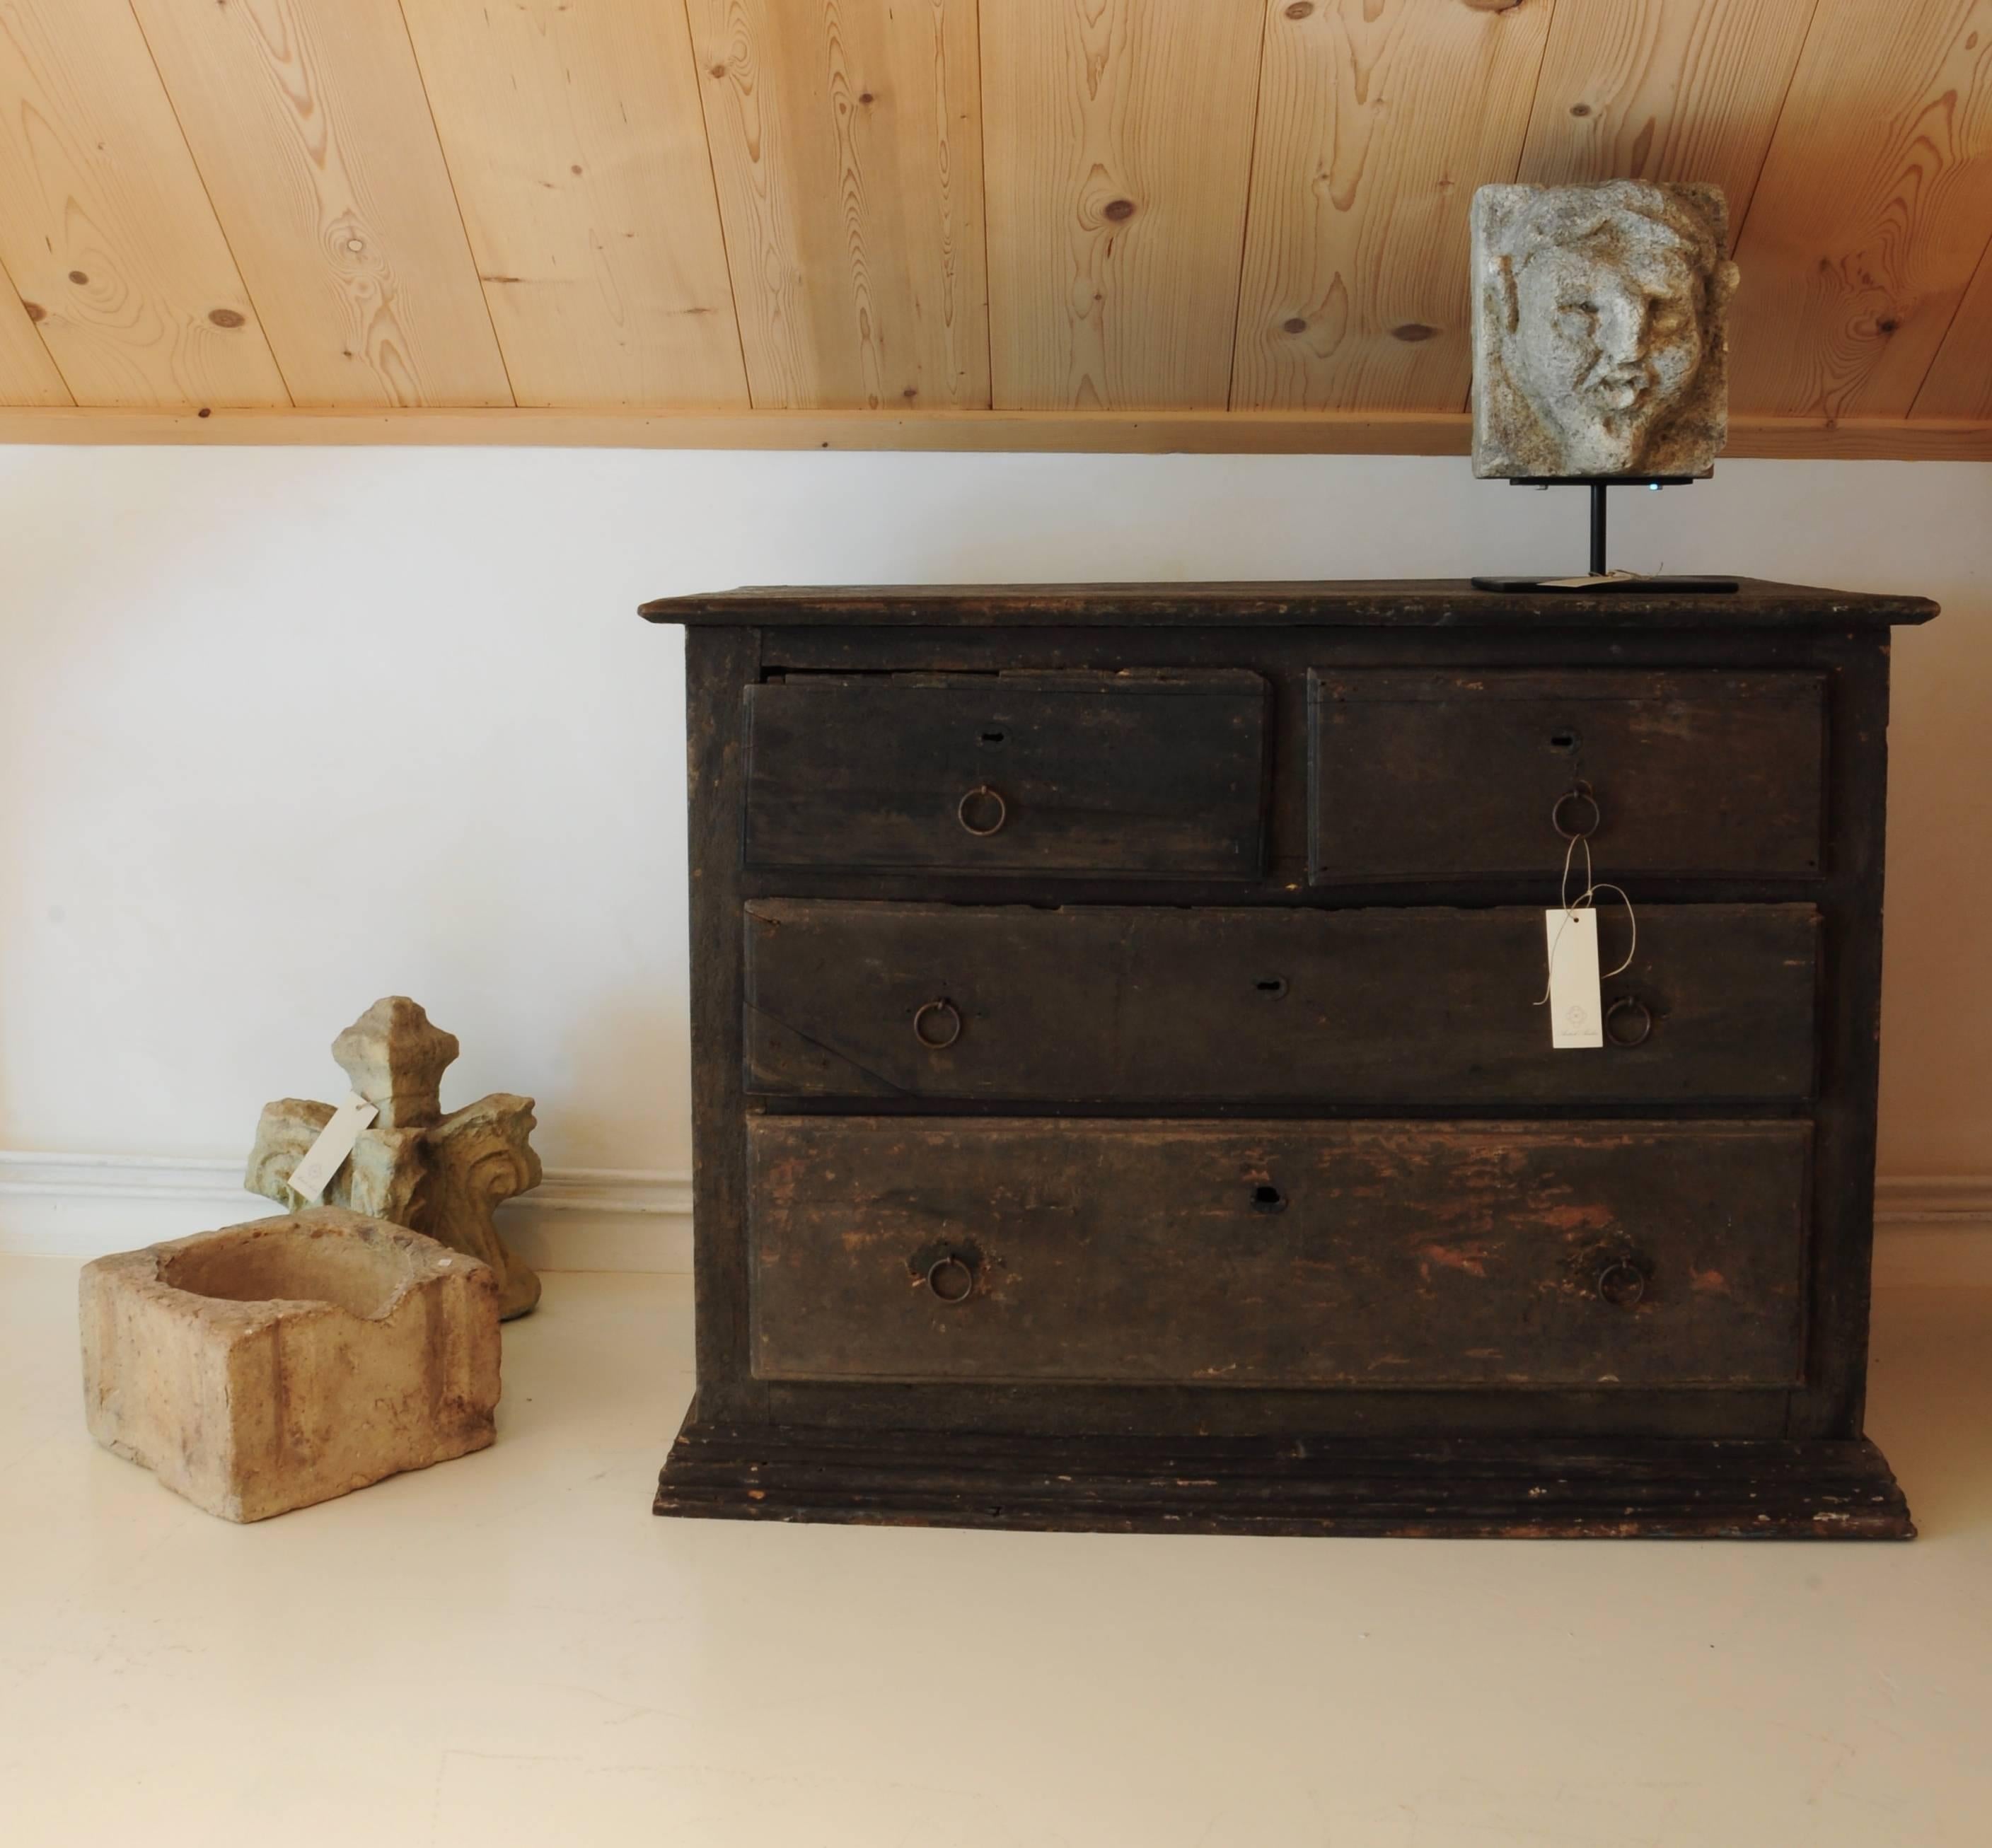 Early 18th century Italian chest of drawers in chestnut with the original faded black varnish.
This Classic design could be found throughout 17th century Europe. However every region had some specific features. The Italians in particular were and